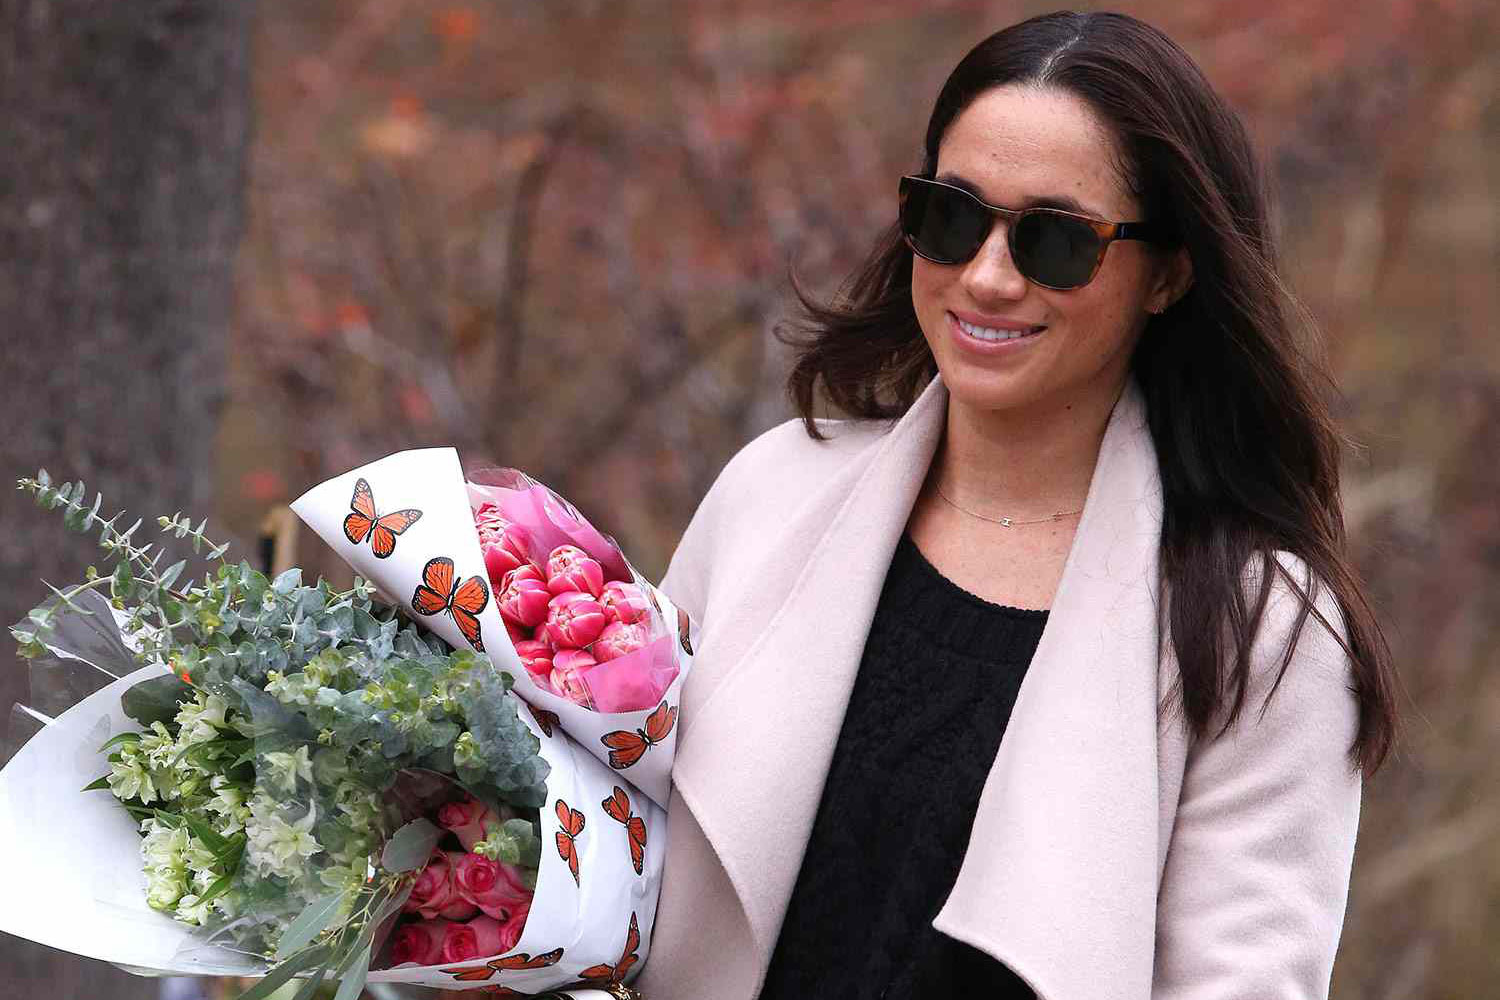 **NO REUSE****NO REUSE** EXCLUSIVE: **PREMIUM EXCLUSIVE RATES APPLY**NO SUBSCRIPTIONS** Prince Harry's girlfriend and Suits actress, Meghan Markle is seen shopping for flowers in Toronto. Meghan, who was happy to be photographed leaving an up-market flower shop, greeted the photographers as they photographed her. The Prince is currently on his last day of a grueling tour in the Caribbean. It has been reported that Meghan is to meet Prince Harry for a vacation before Christmas. Taken 03/12/2016 Pictured: Meghan Markle Ref: SPL1358694 051216 EXCLUSIVE Picture by: Splash News Splash News and Pictures Los Angeles: 310-821-2666 New York: 212-619-2666 London: 870-934-2666 photodesk@splashnews.com